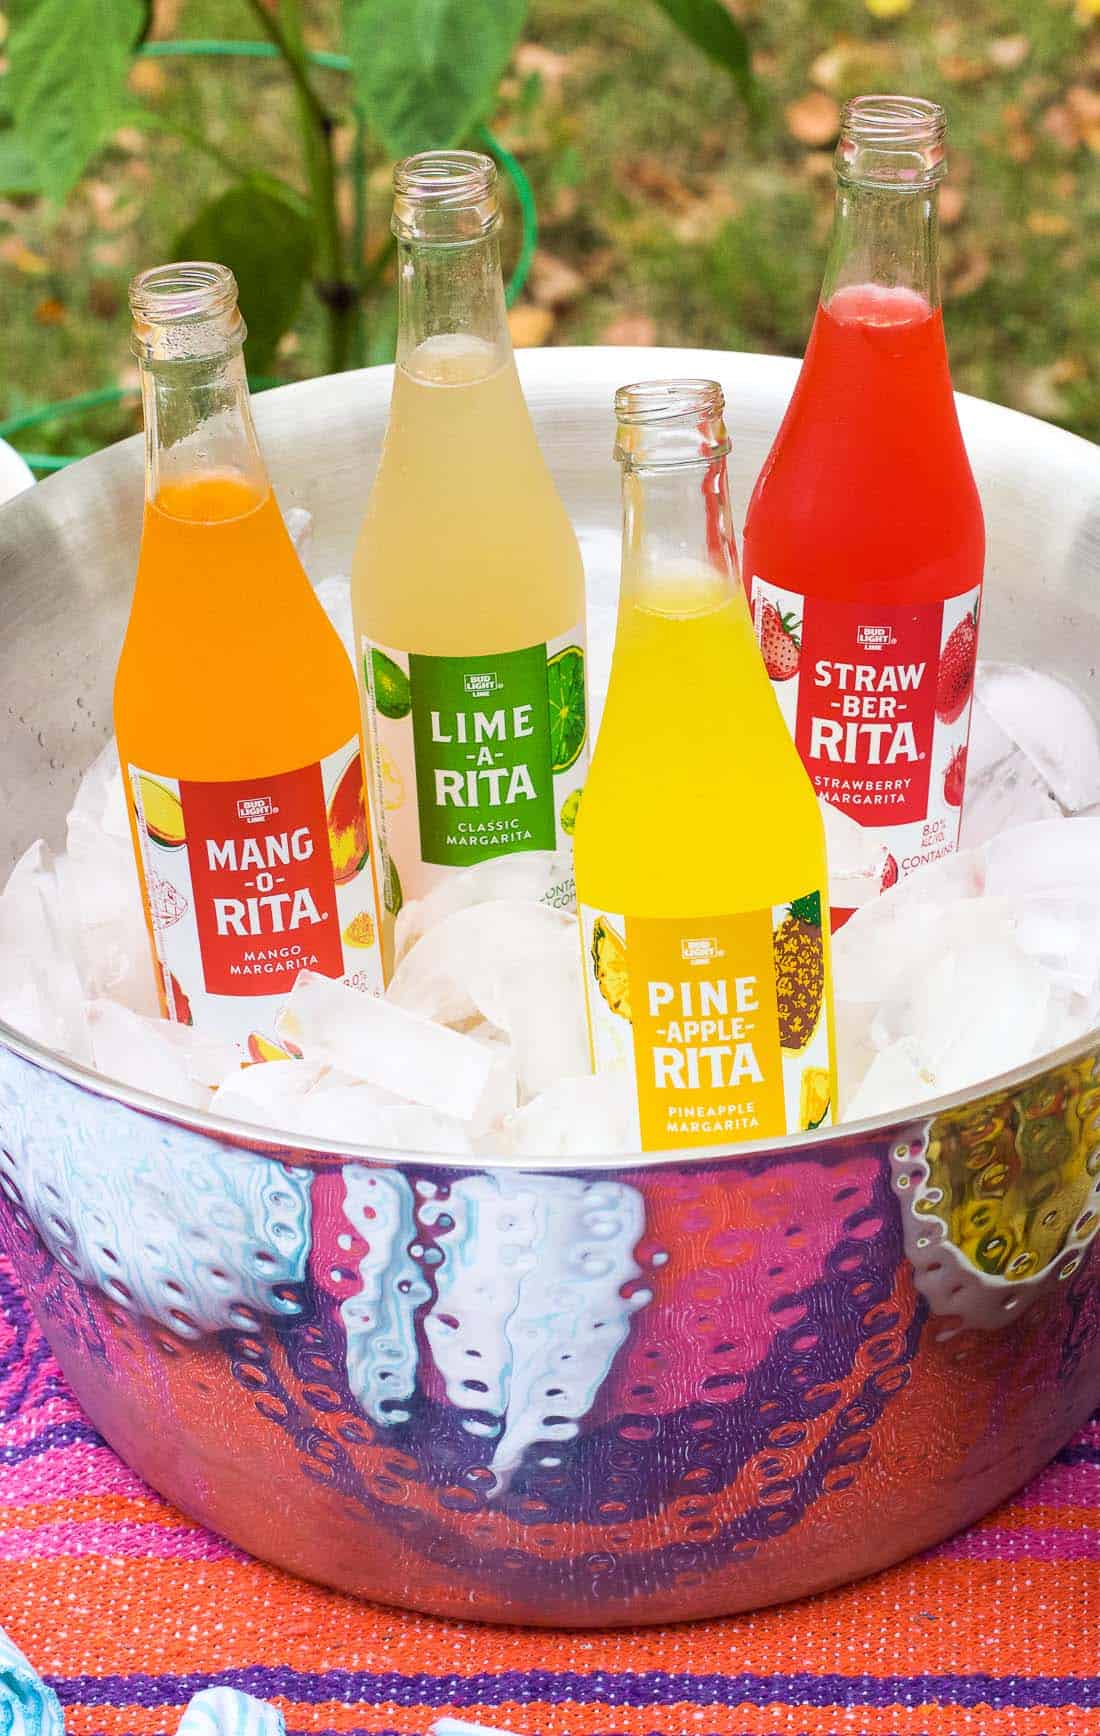 Four bottles of RITAs (mango, lime, pineapple, and strawberry) in an ice cube-filled hammered metal cooler bucket